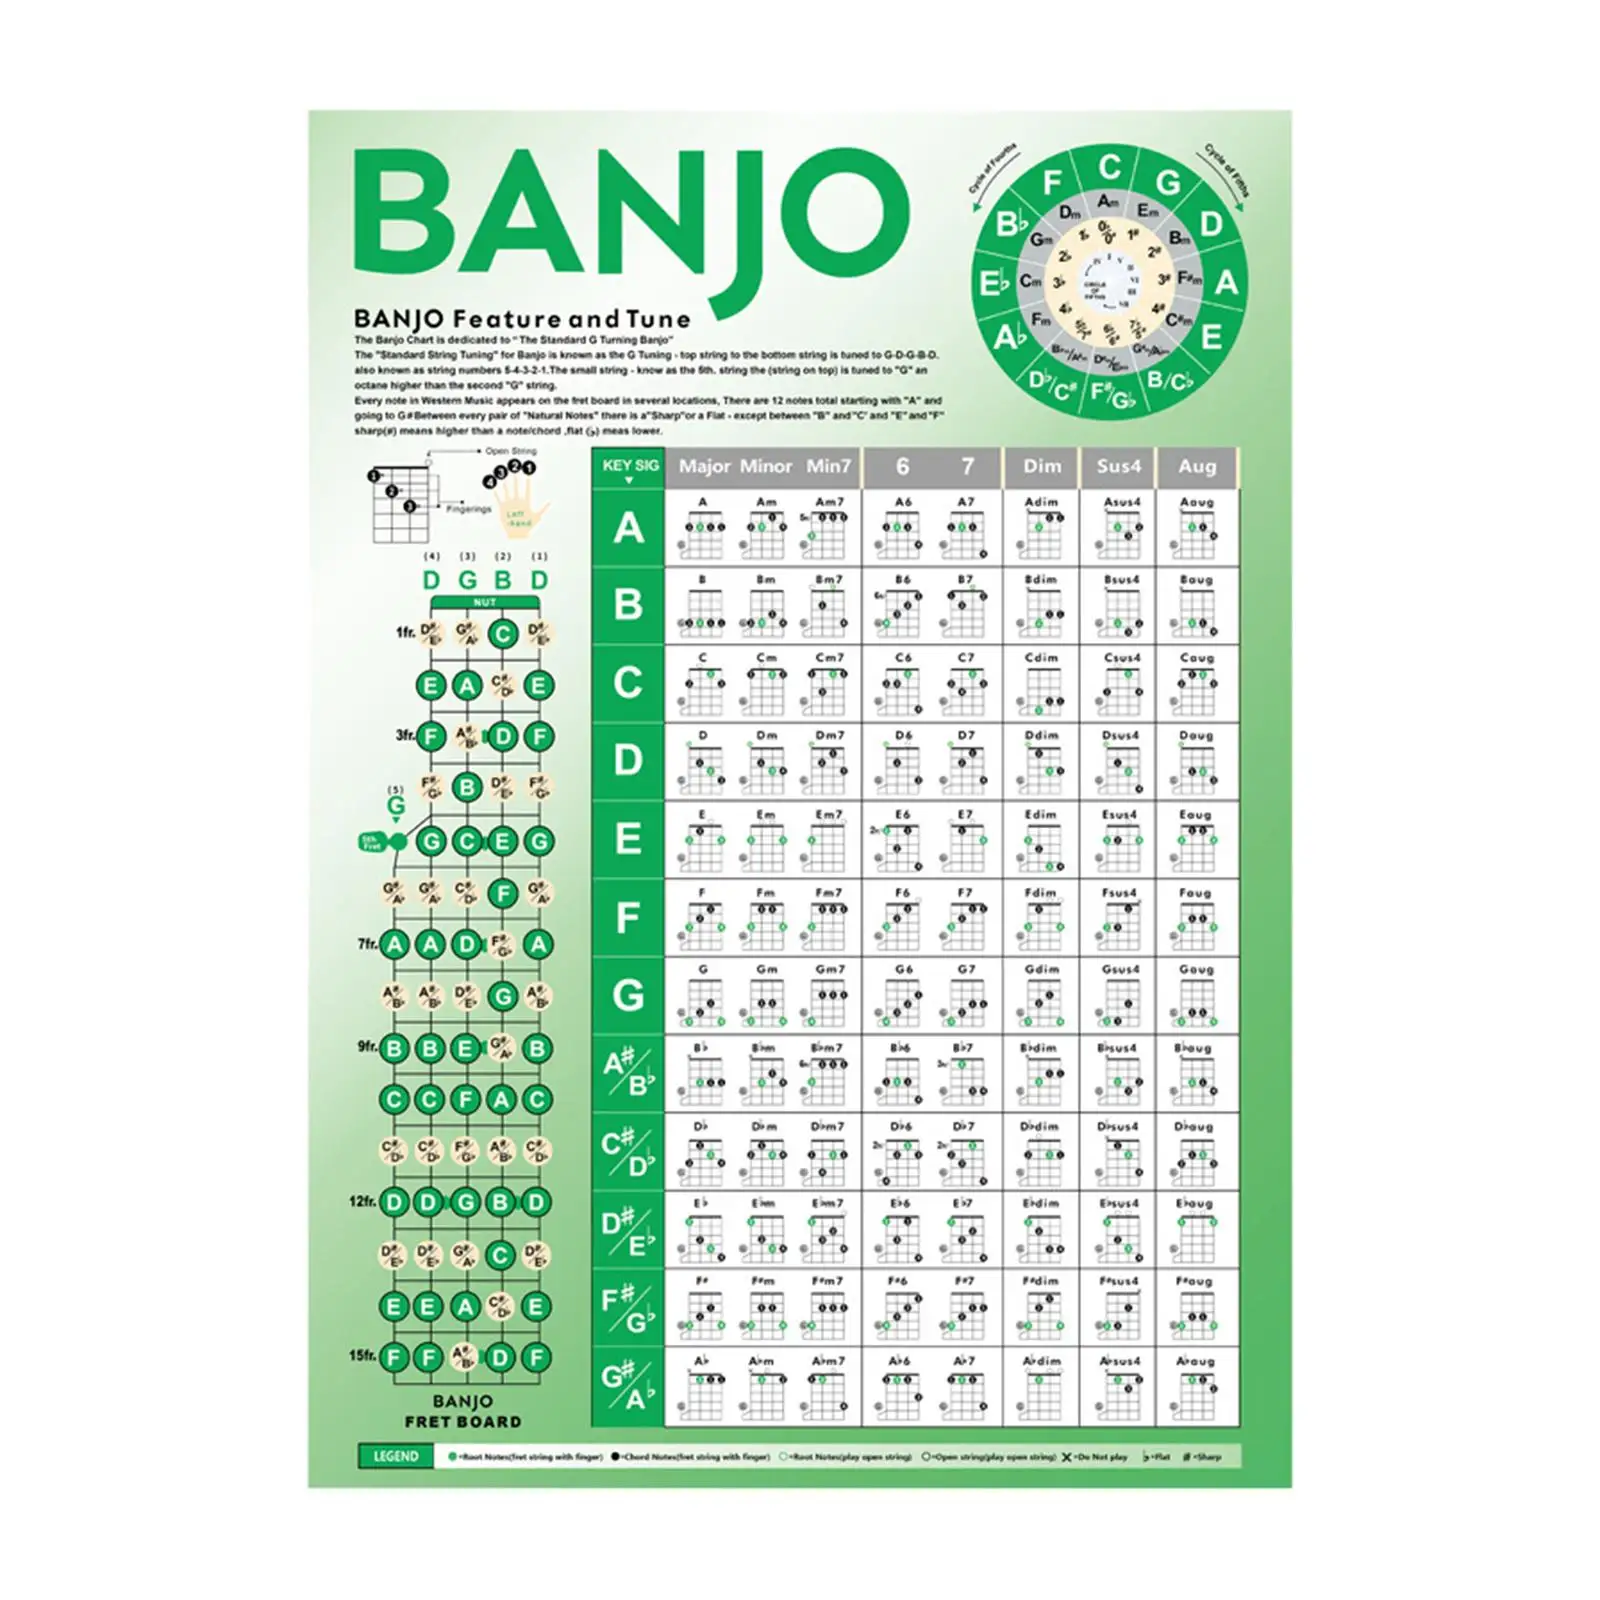 Banjo Chords Chart Sheet Portable Banjo Fretboard Notes Practice Chart for Friends Piano Players Beginner Adults Holiday Gifts